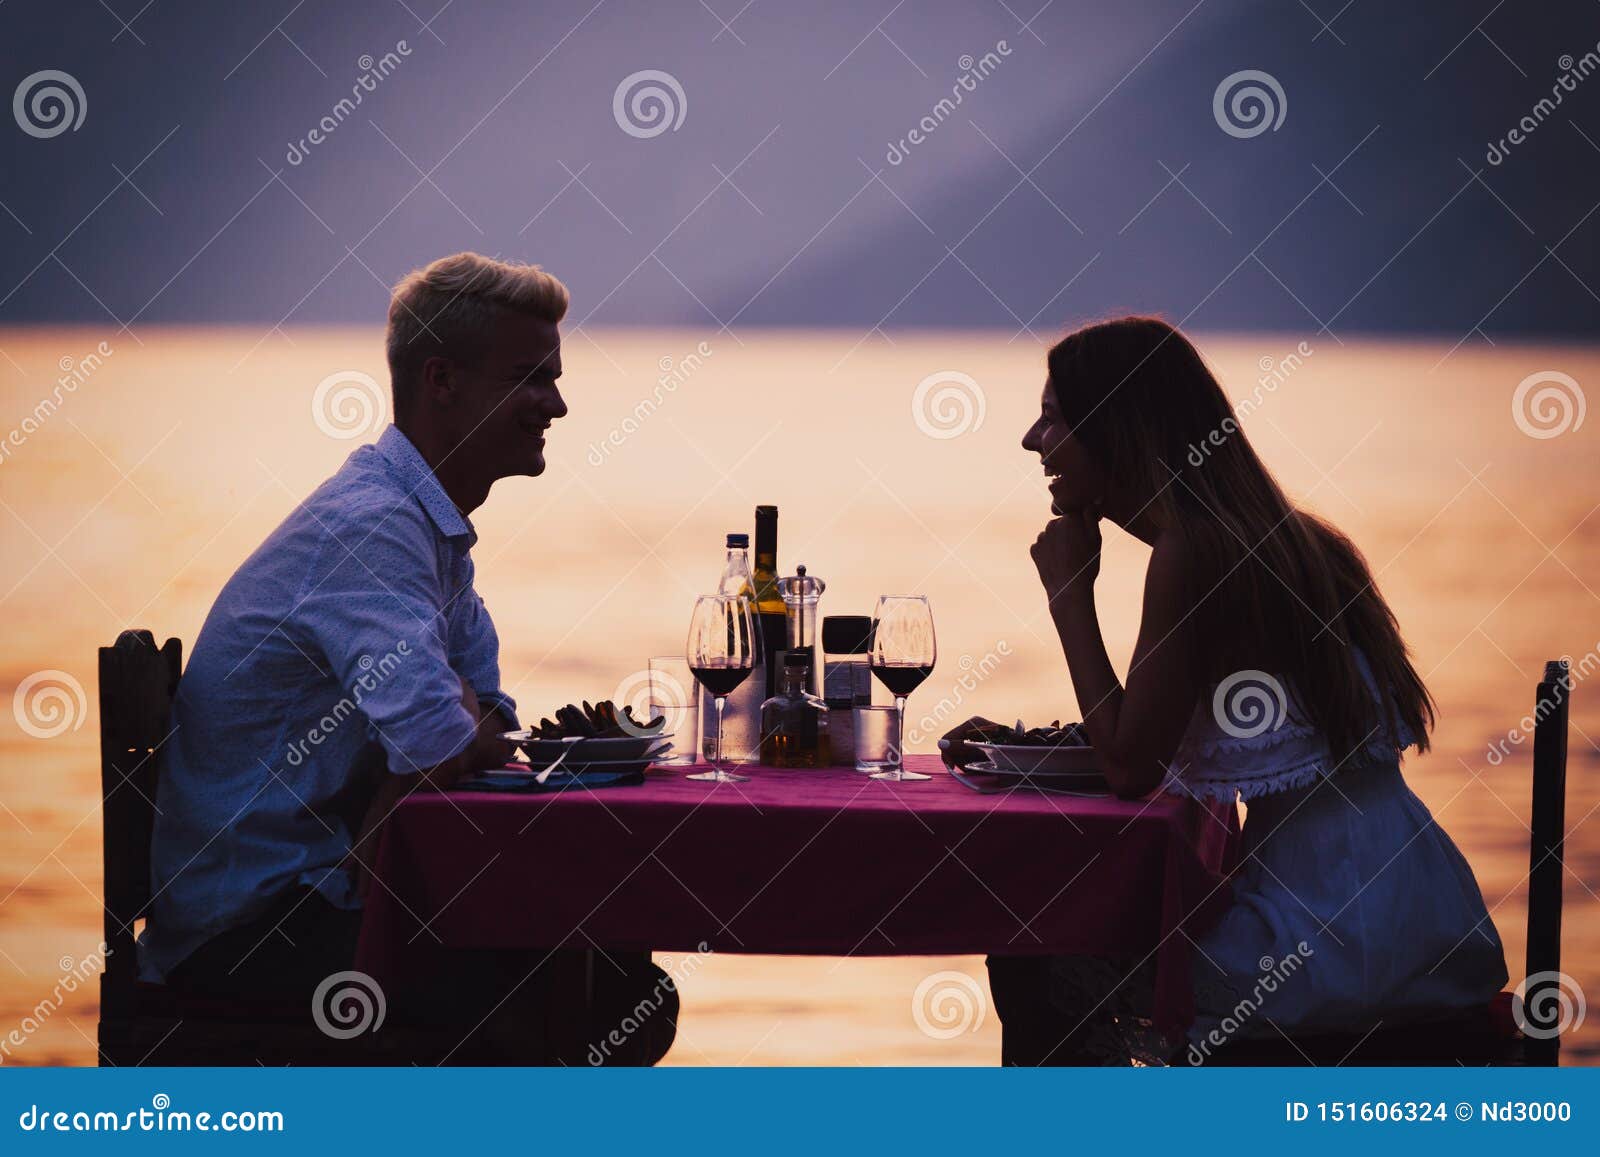 people, vacation, love and romance concept. young couple enjoying a romantic dinner on beach.